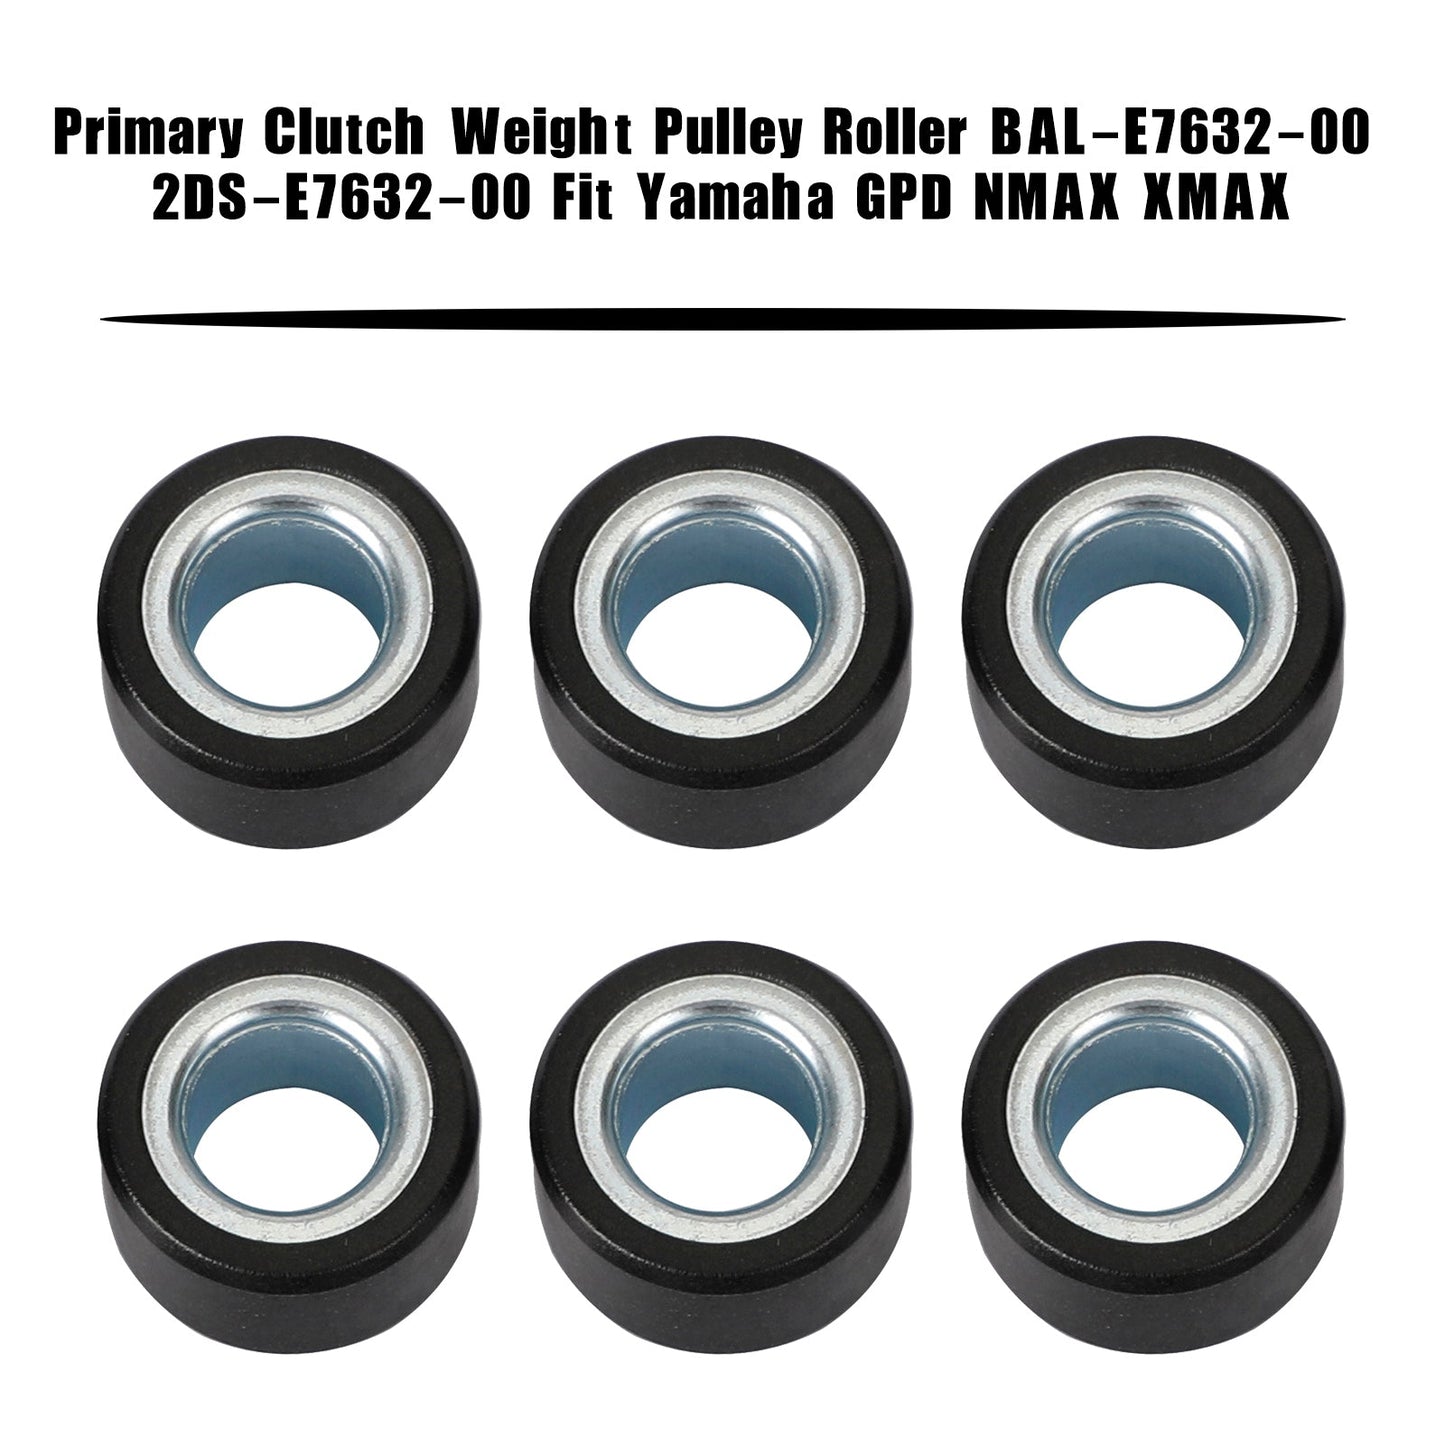 Yamaha Gpd125-A Nmax125 Yp125Ra Xmax125 Pulley Roller Primary Clutch Weight